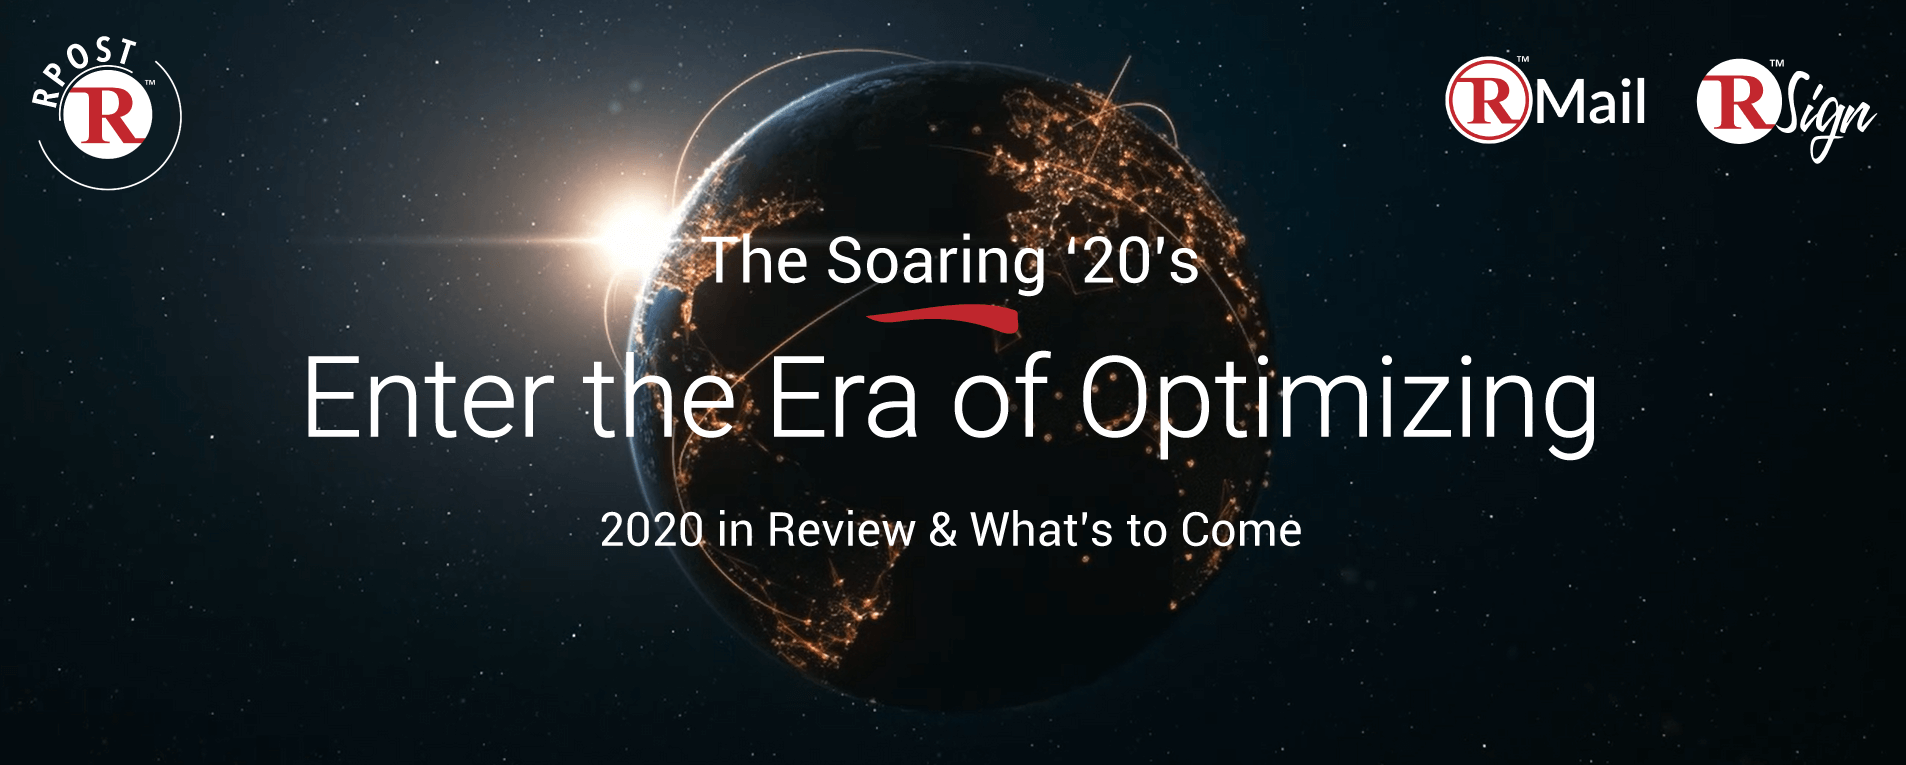 Enter the Soaring 20s with RPost—Year in Review and What’s Ahead